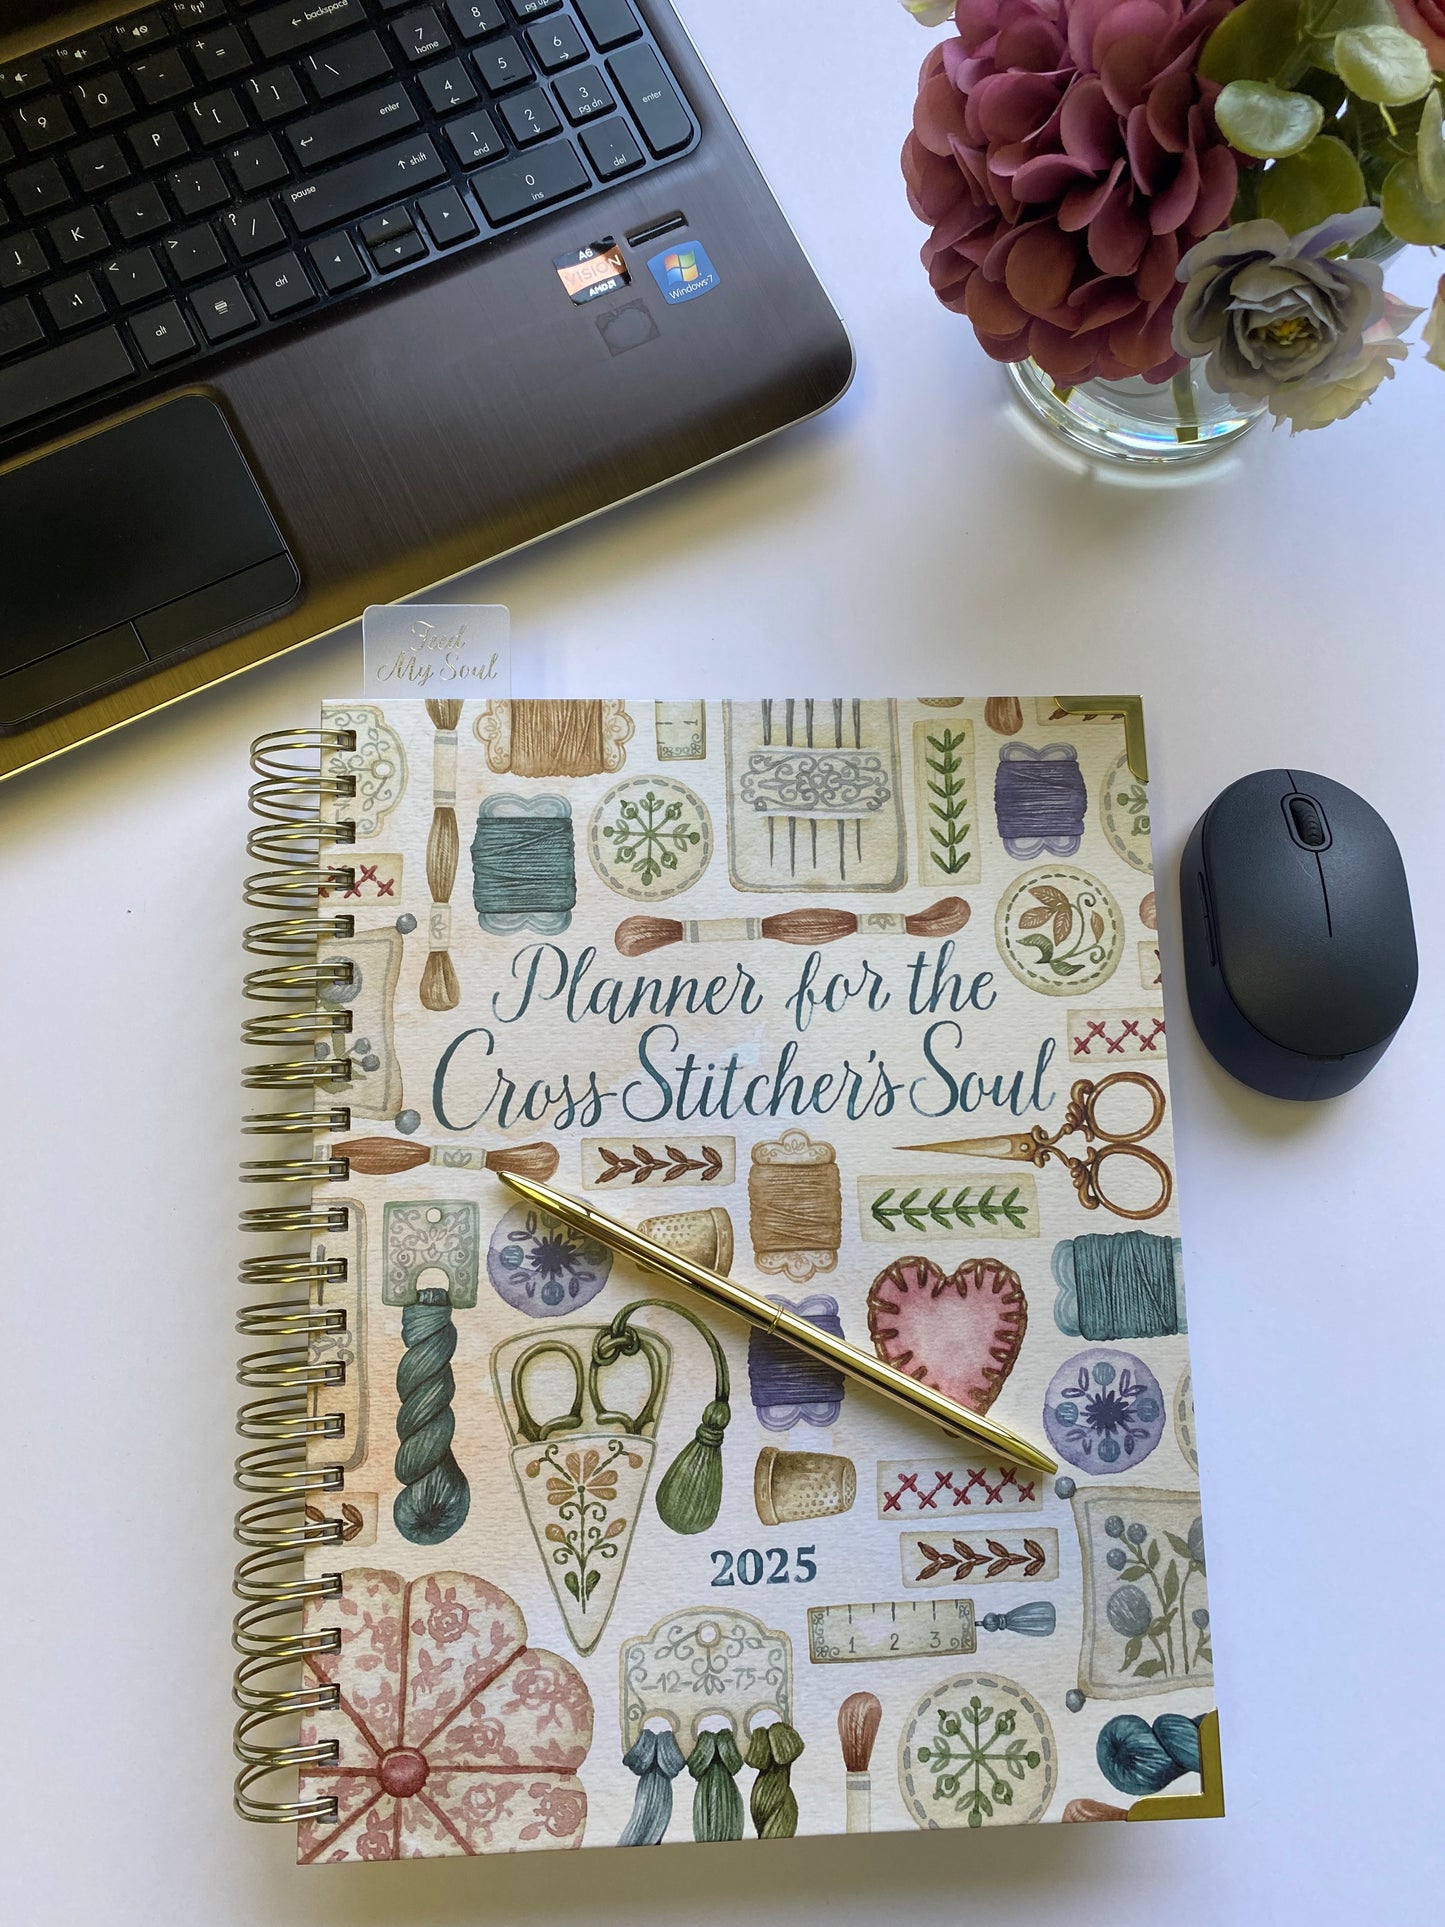 NEW Planner for the Cross Stitcher's Soul 2025